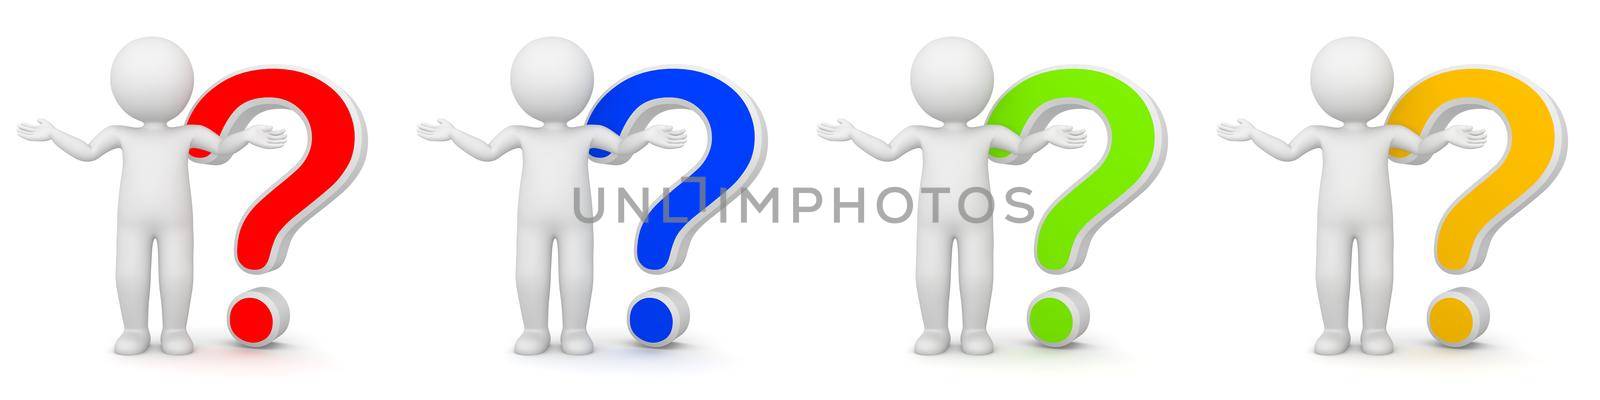 3D Rendering of man with question mark by Kzenon